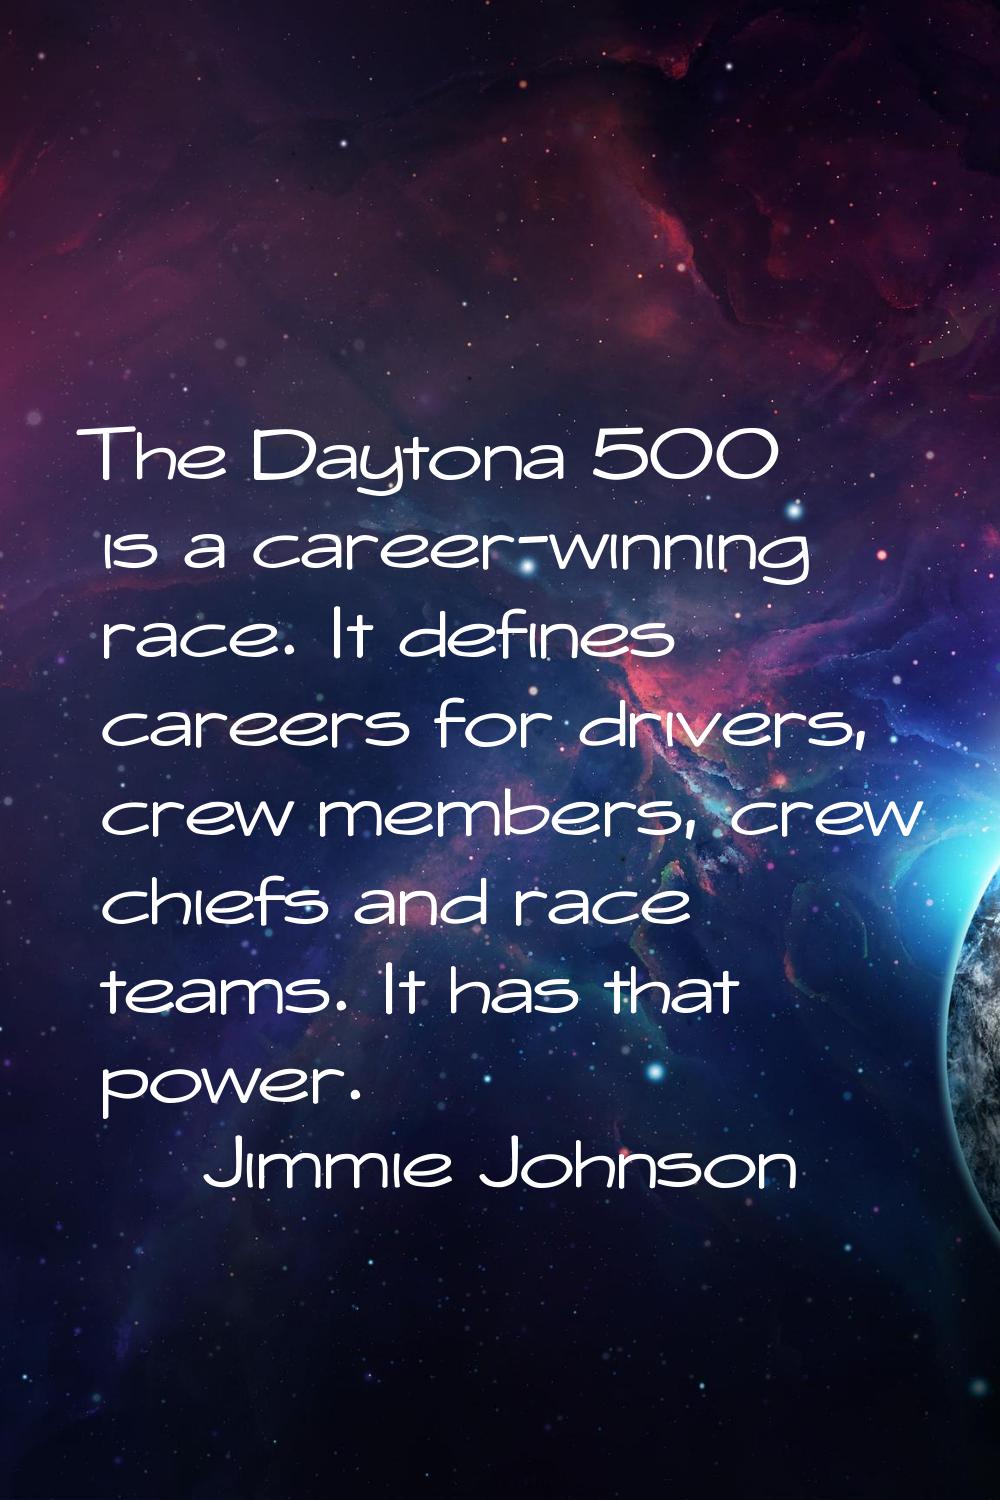 The Daytona 500 is a career-winning race. It defines careers for drivers, crew members, crew chiefs